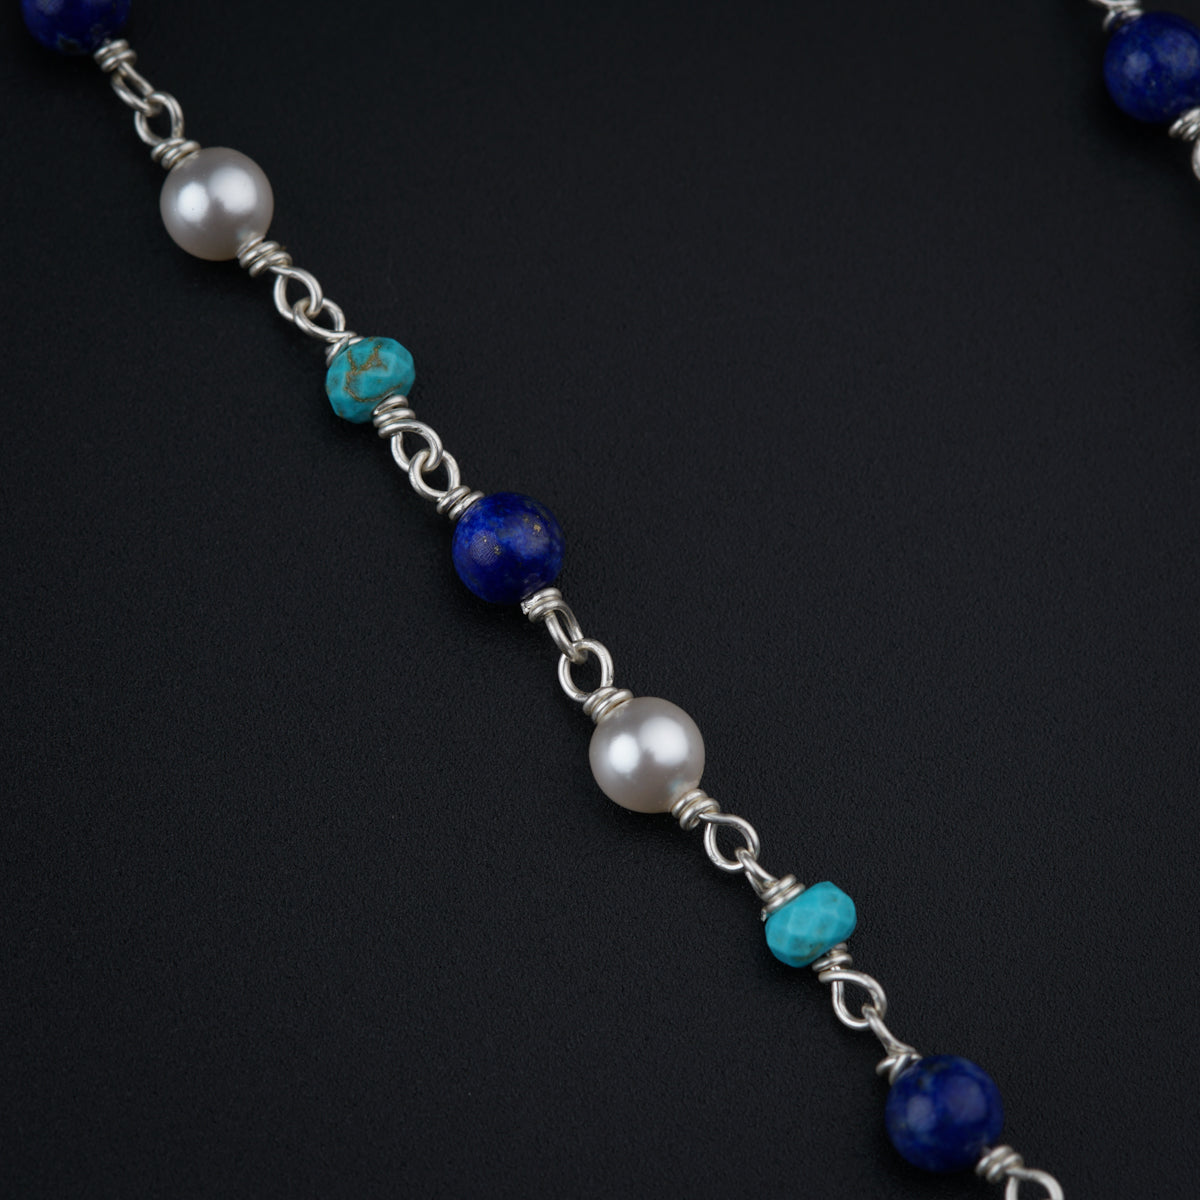 Antique Silver Necklace with Pearls, Lapis and Turquoise beads